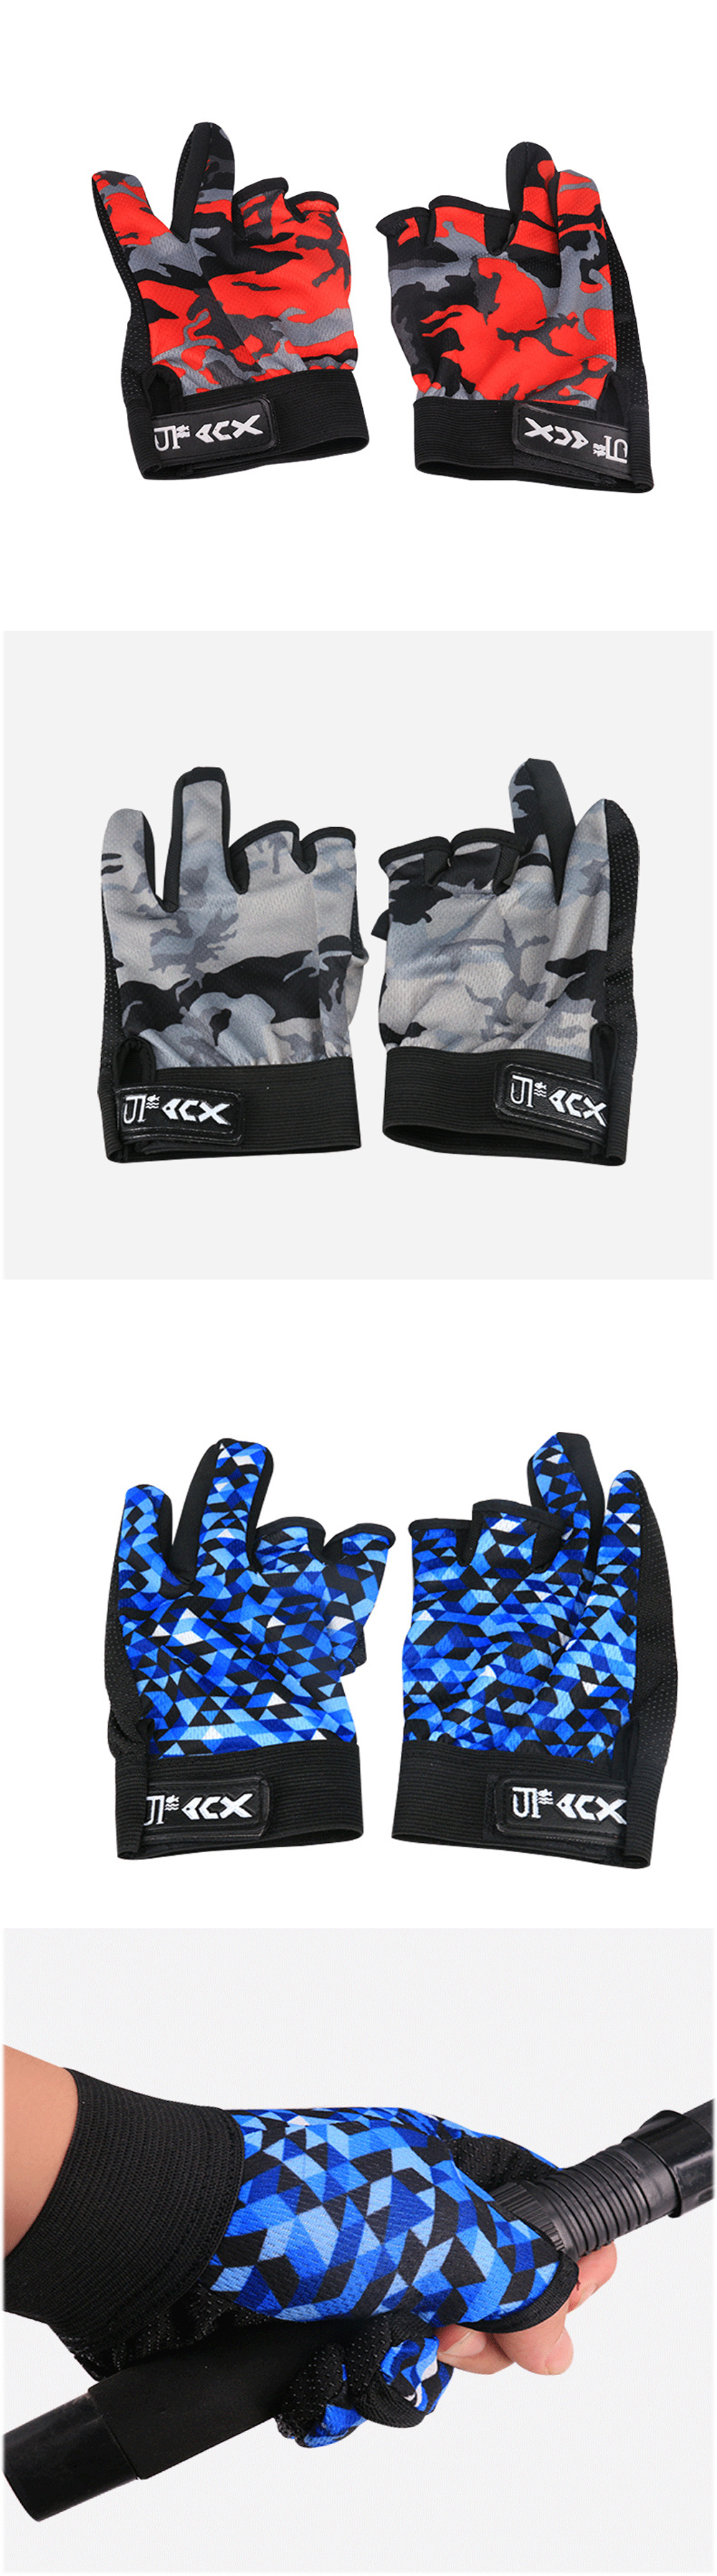 DEUKIO-Fingers-Gloves-Anti-slip-Breathable-High-Stretch-Comfortable-Hand-Gloves-Outdoor-Sports-Finge-1842022-3